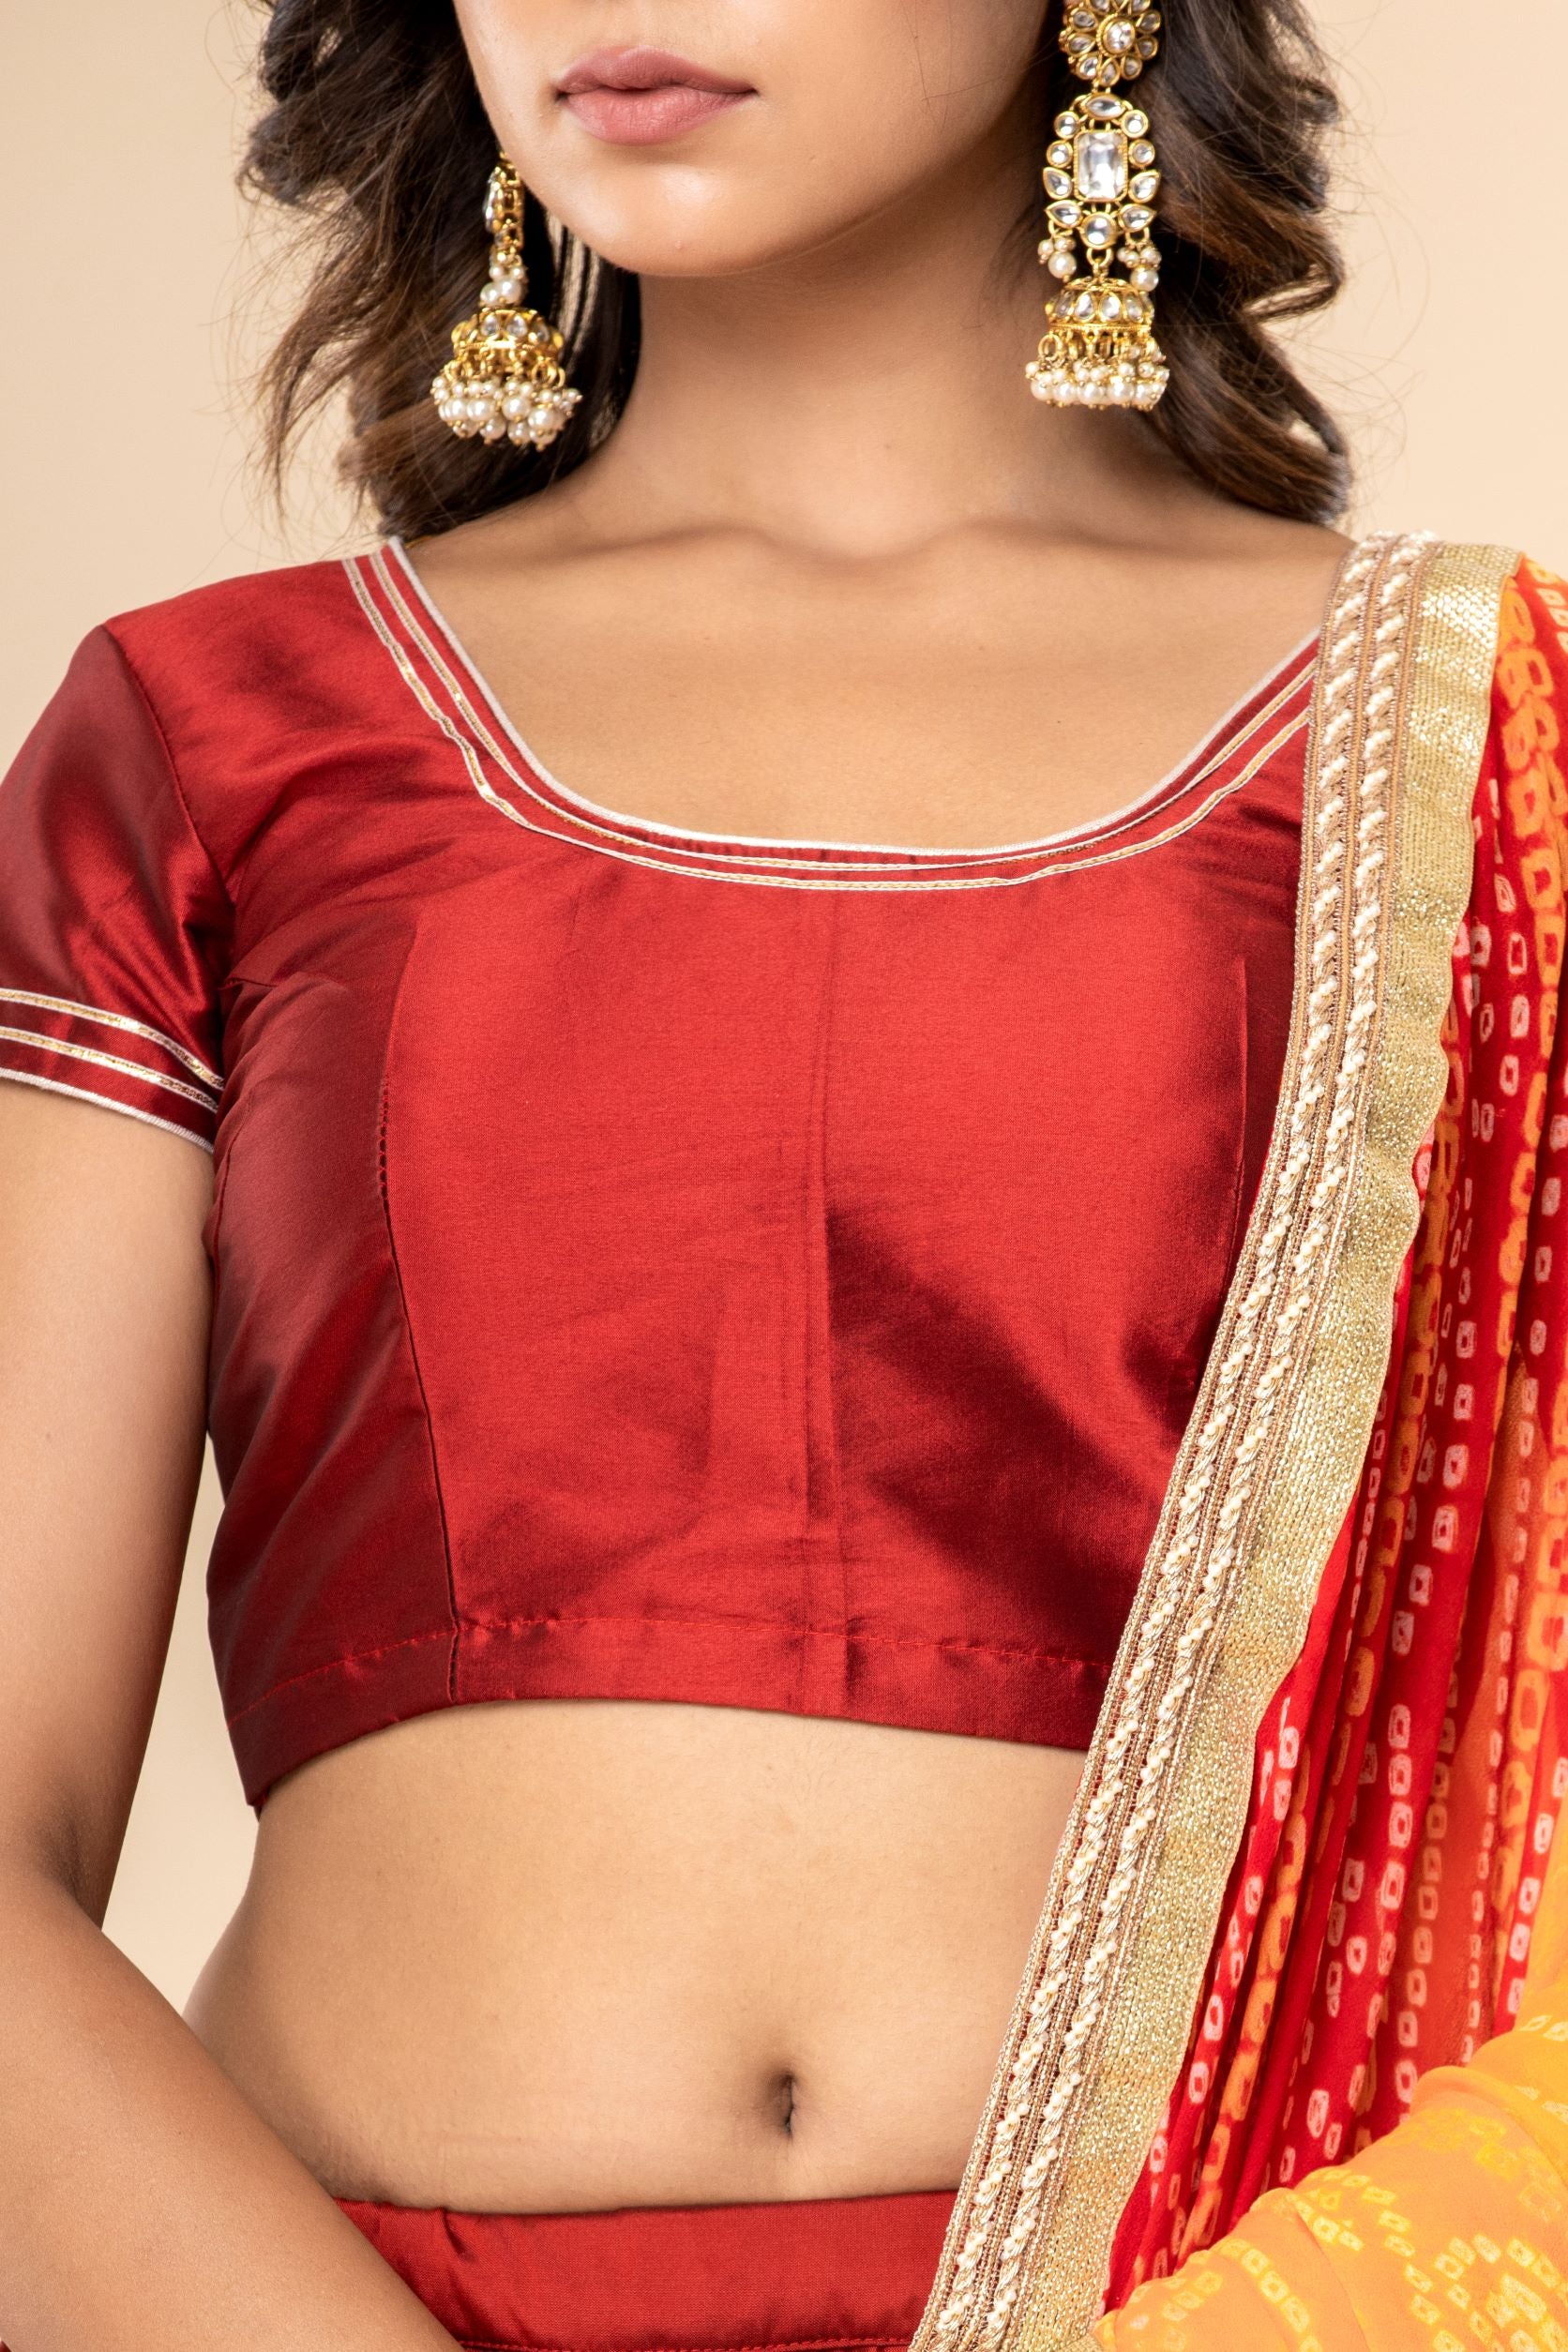 Butter Silk Lehenga And Blouse In Maroon With A Georgette Bandhani Dupatta